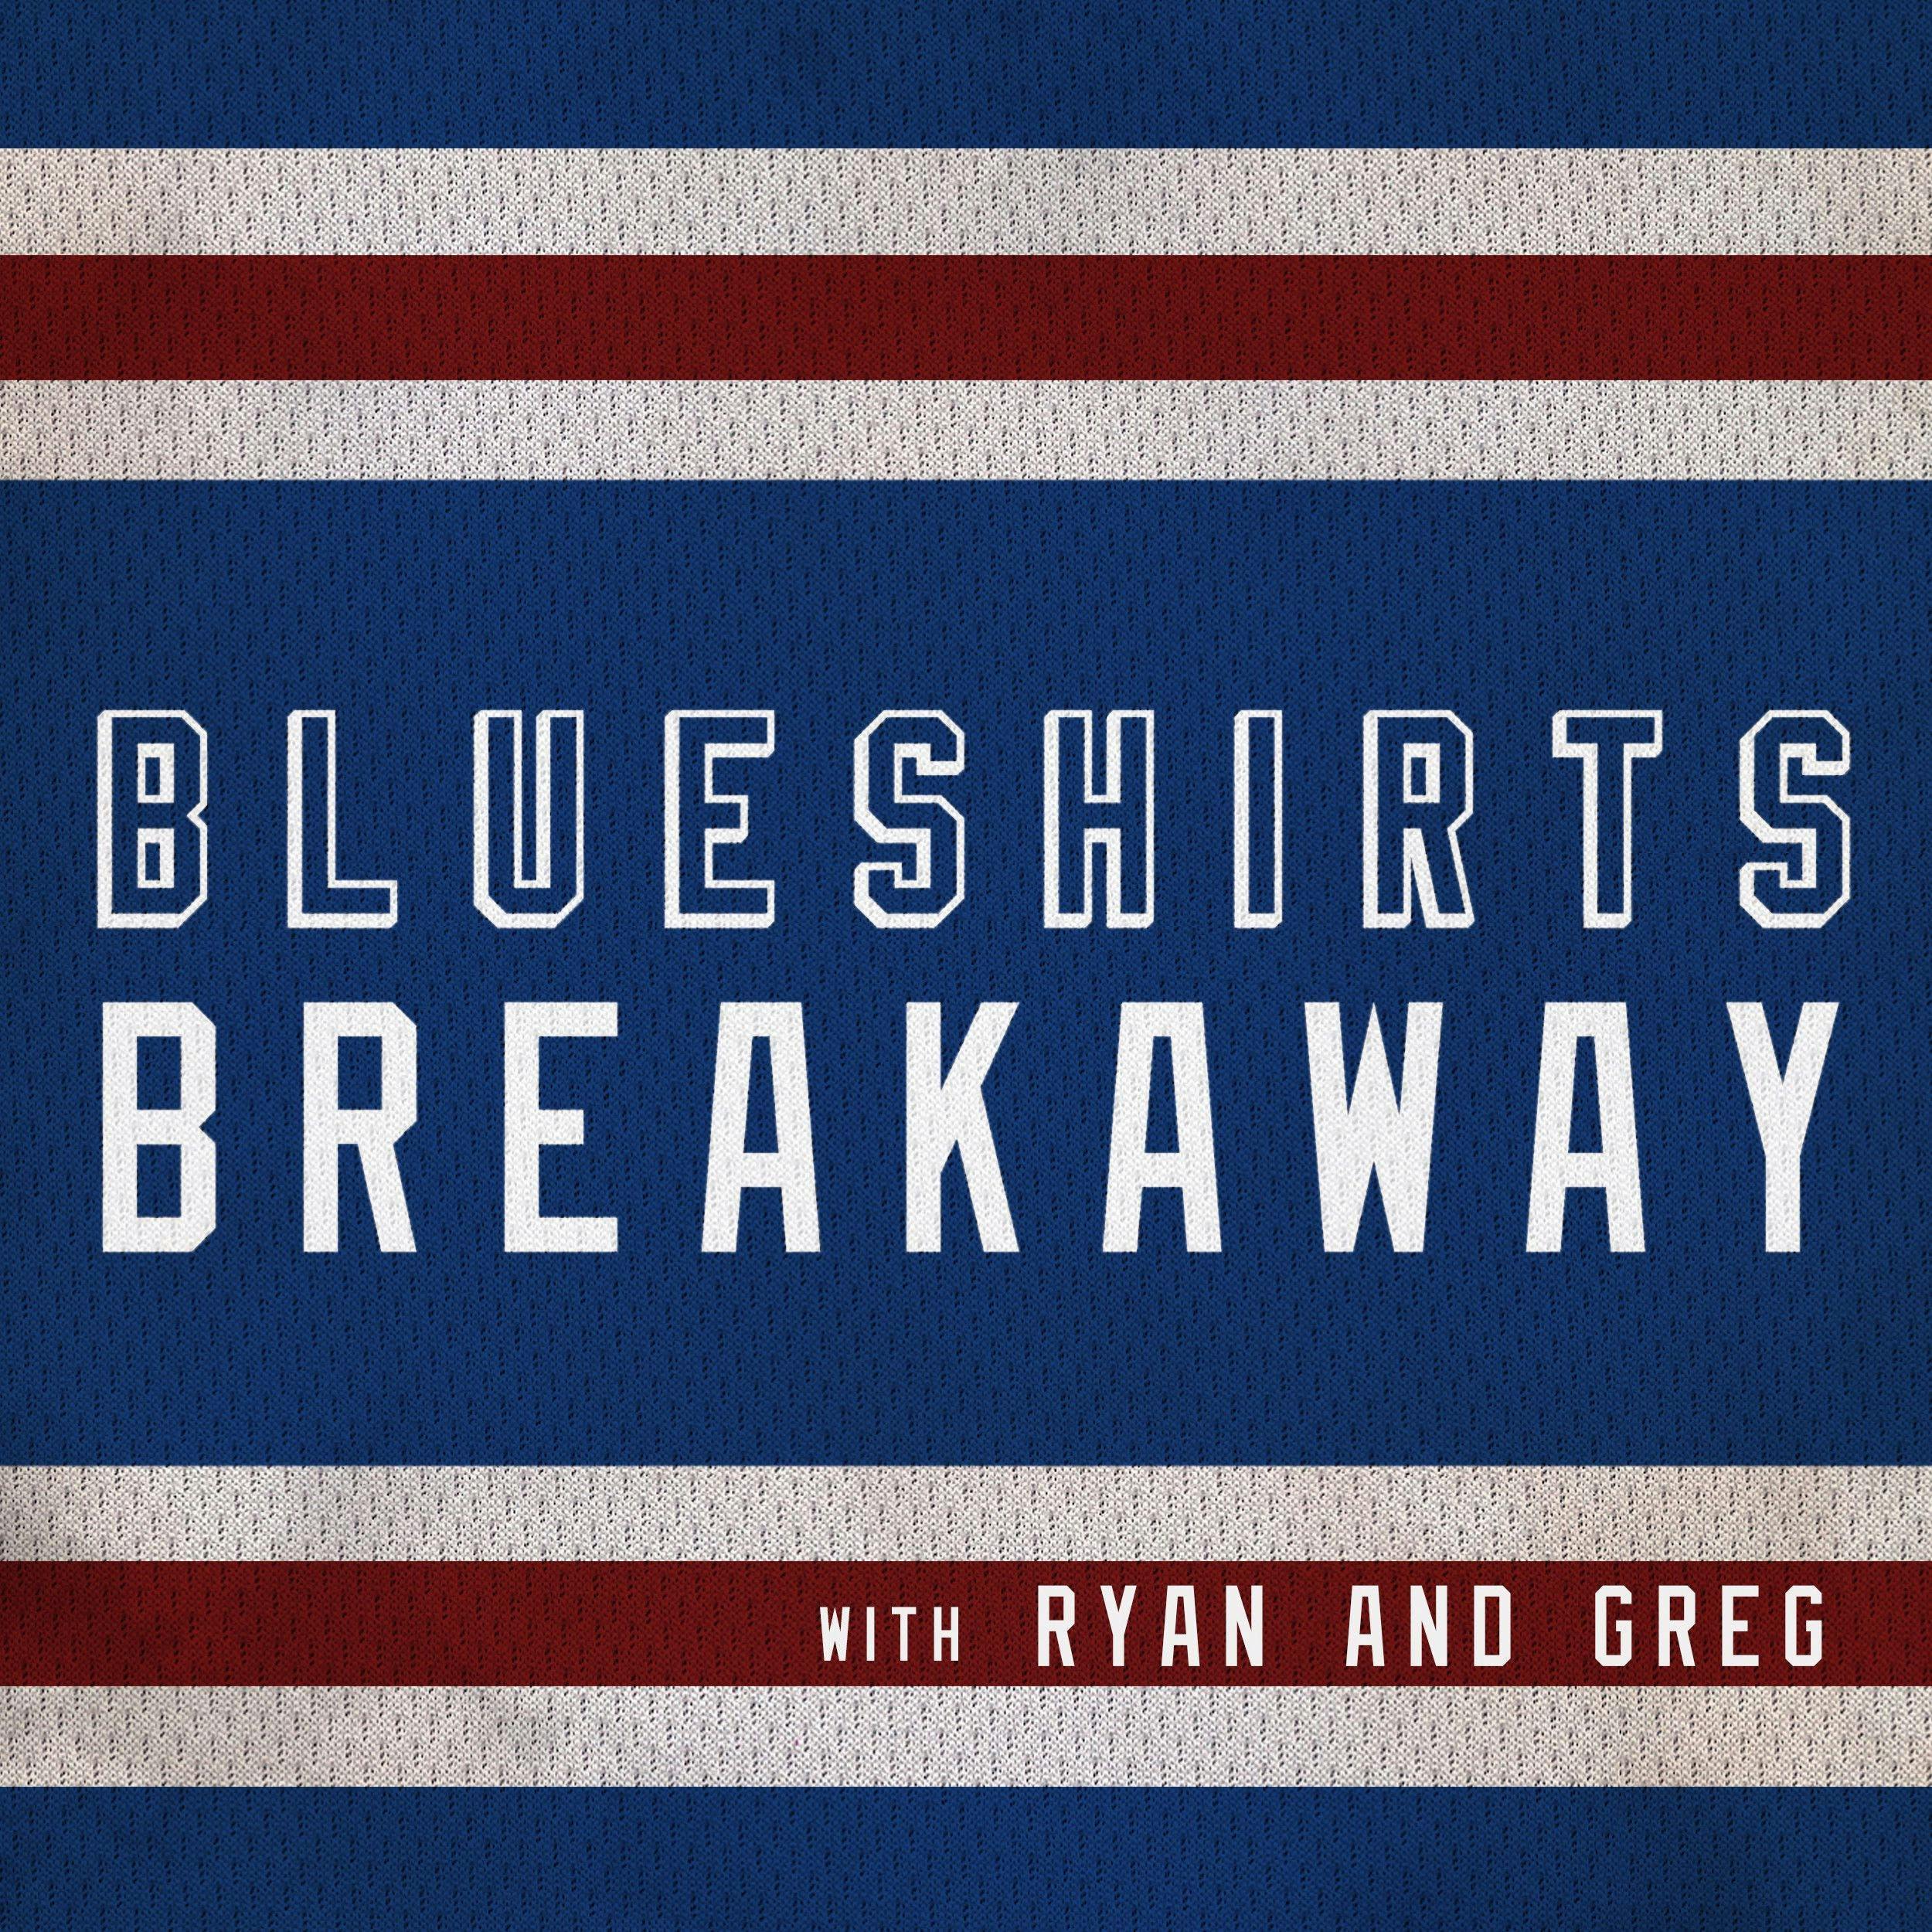 Blueshirts Breakaway EP 5 - Somber edition, a brutal collapse and should Kreider be traded